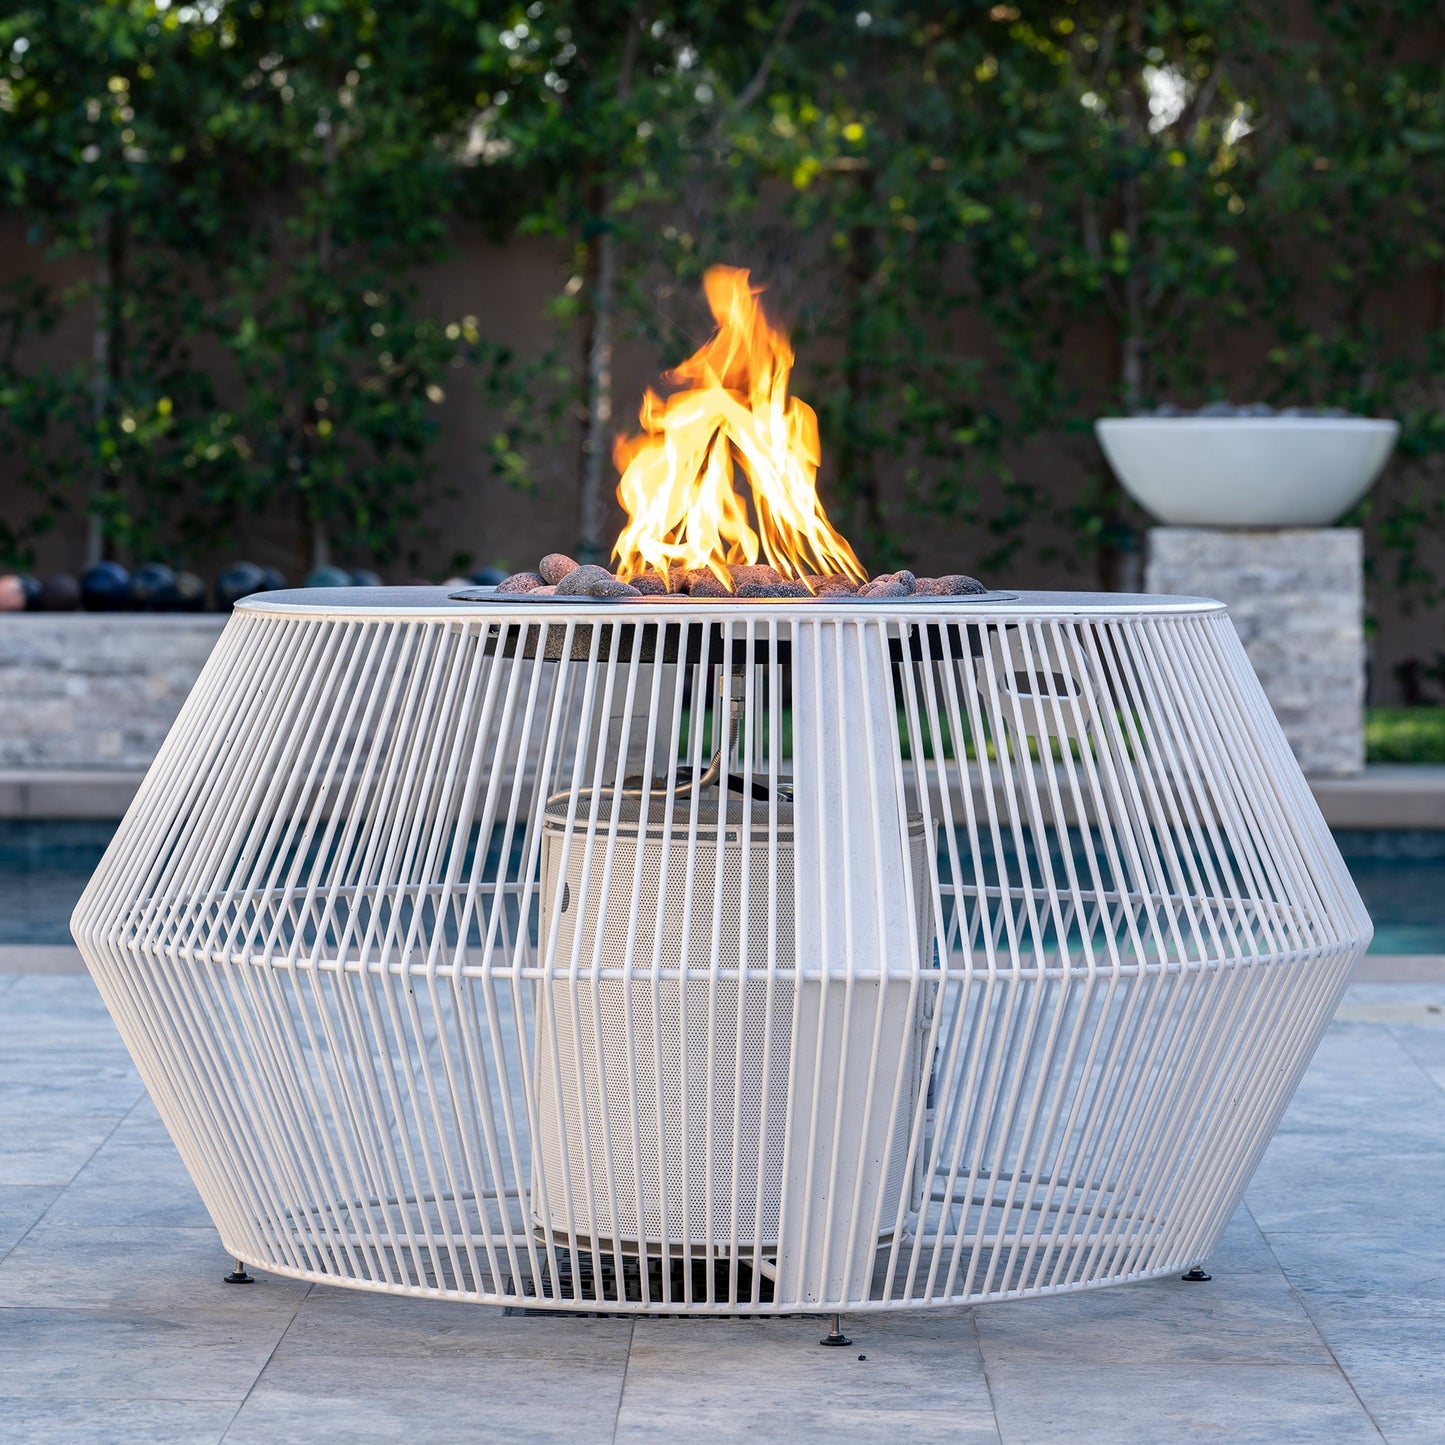 The Outdoor Plus Round Cesto 48" Powder Coated Natural Gas Fire Pit with 12V Electronic Ignition